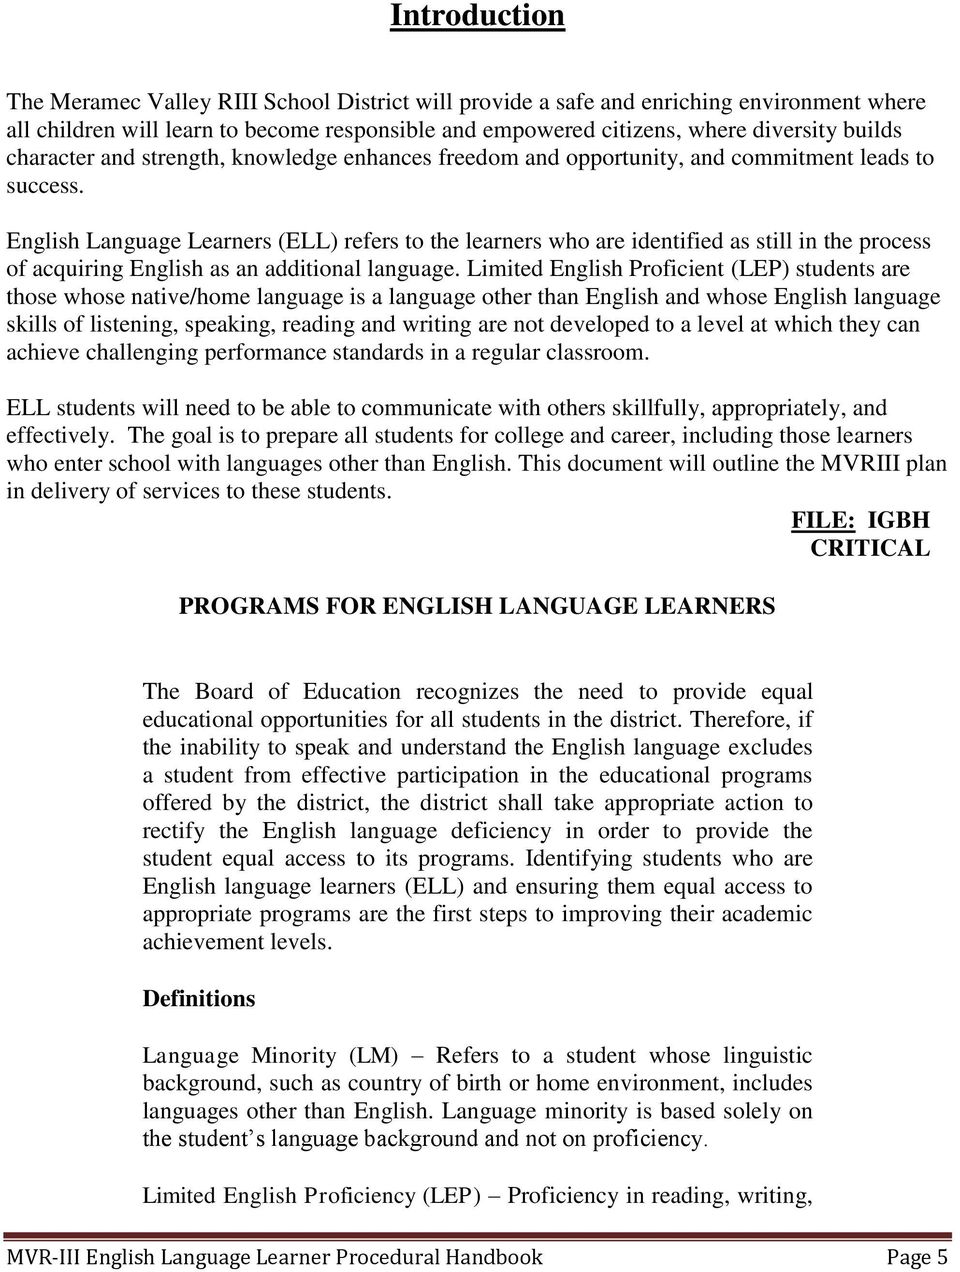 English Language Learners (ELL) refers to the learners who are identified as still in the process of acquiring English as an additional language.